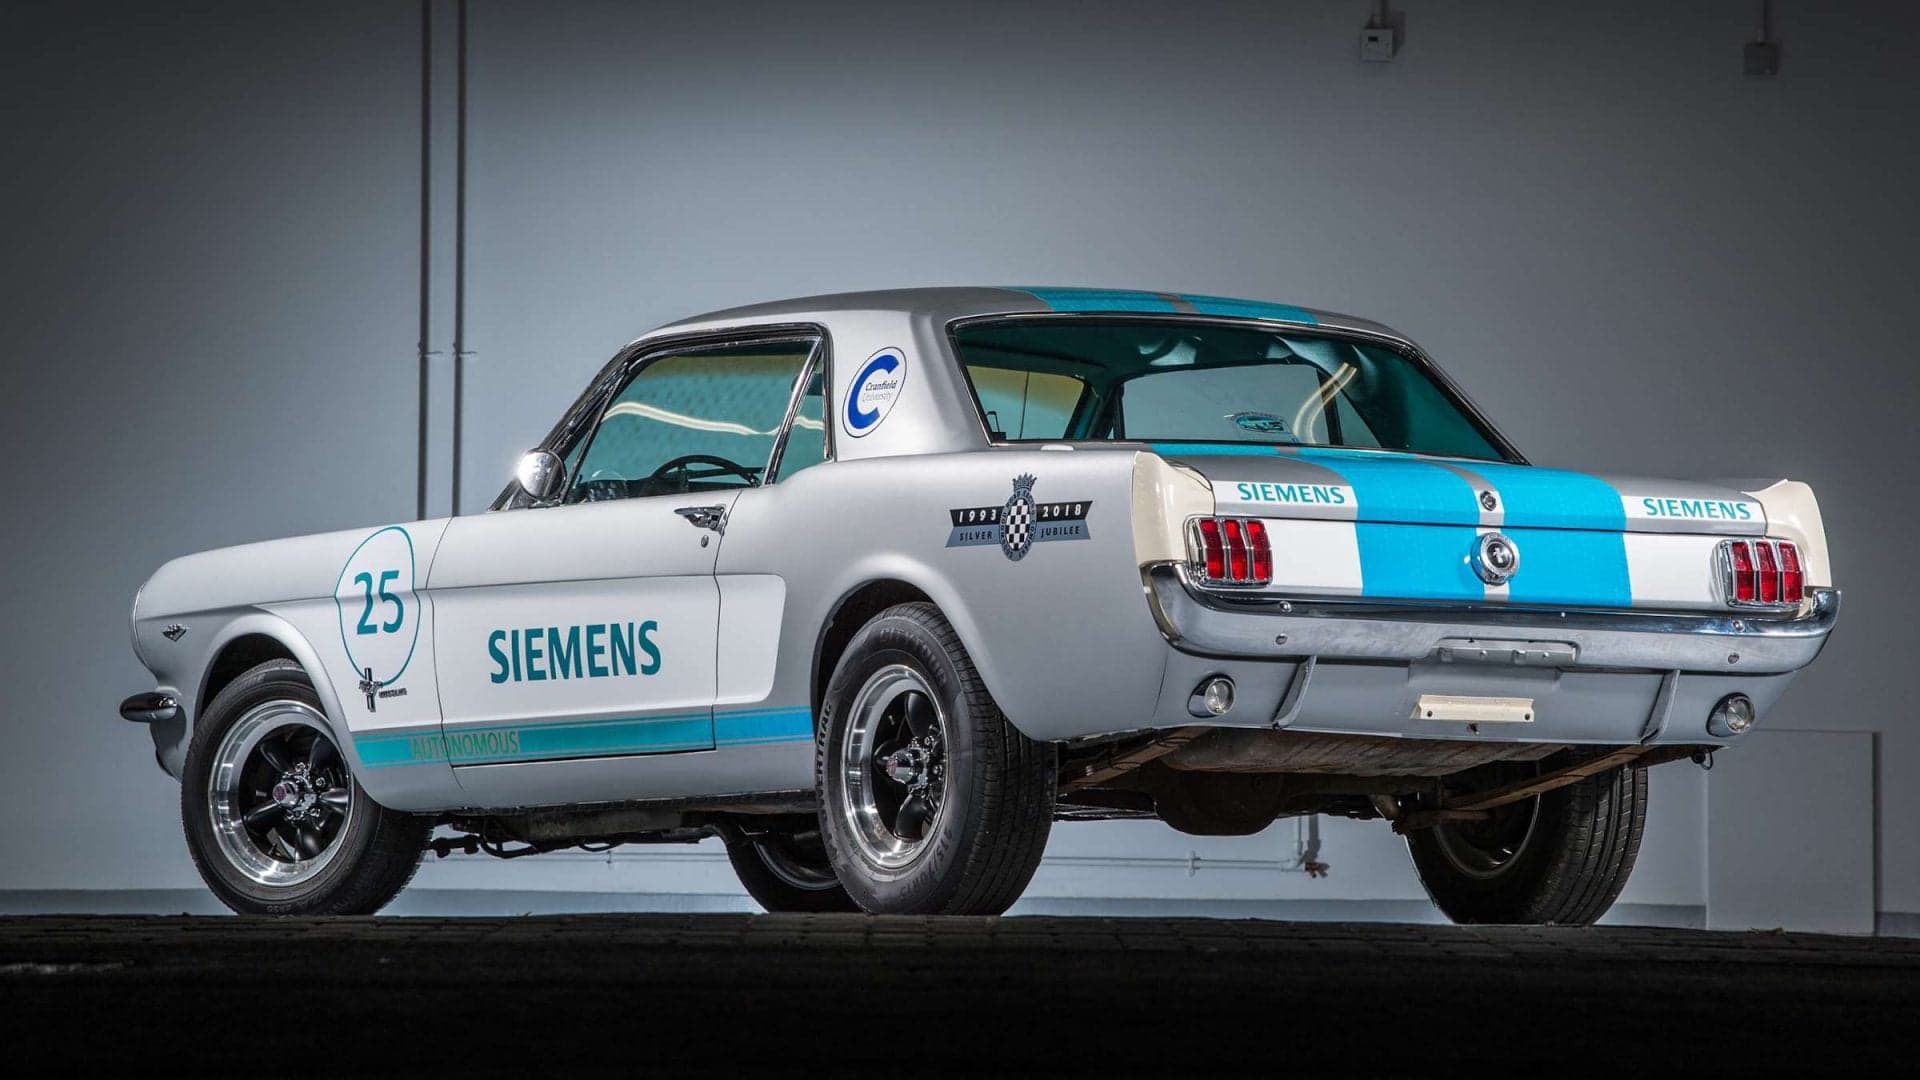 A 1965 Mustang With Autonomous Tech is Set to Run the Goodwood Hill Climb